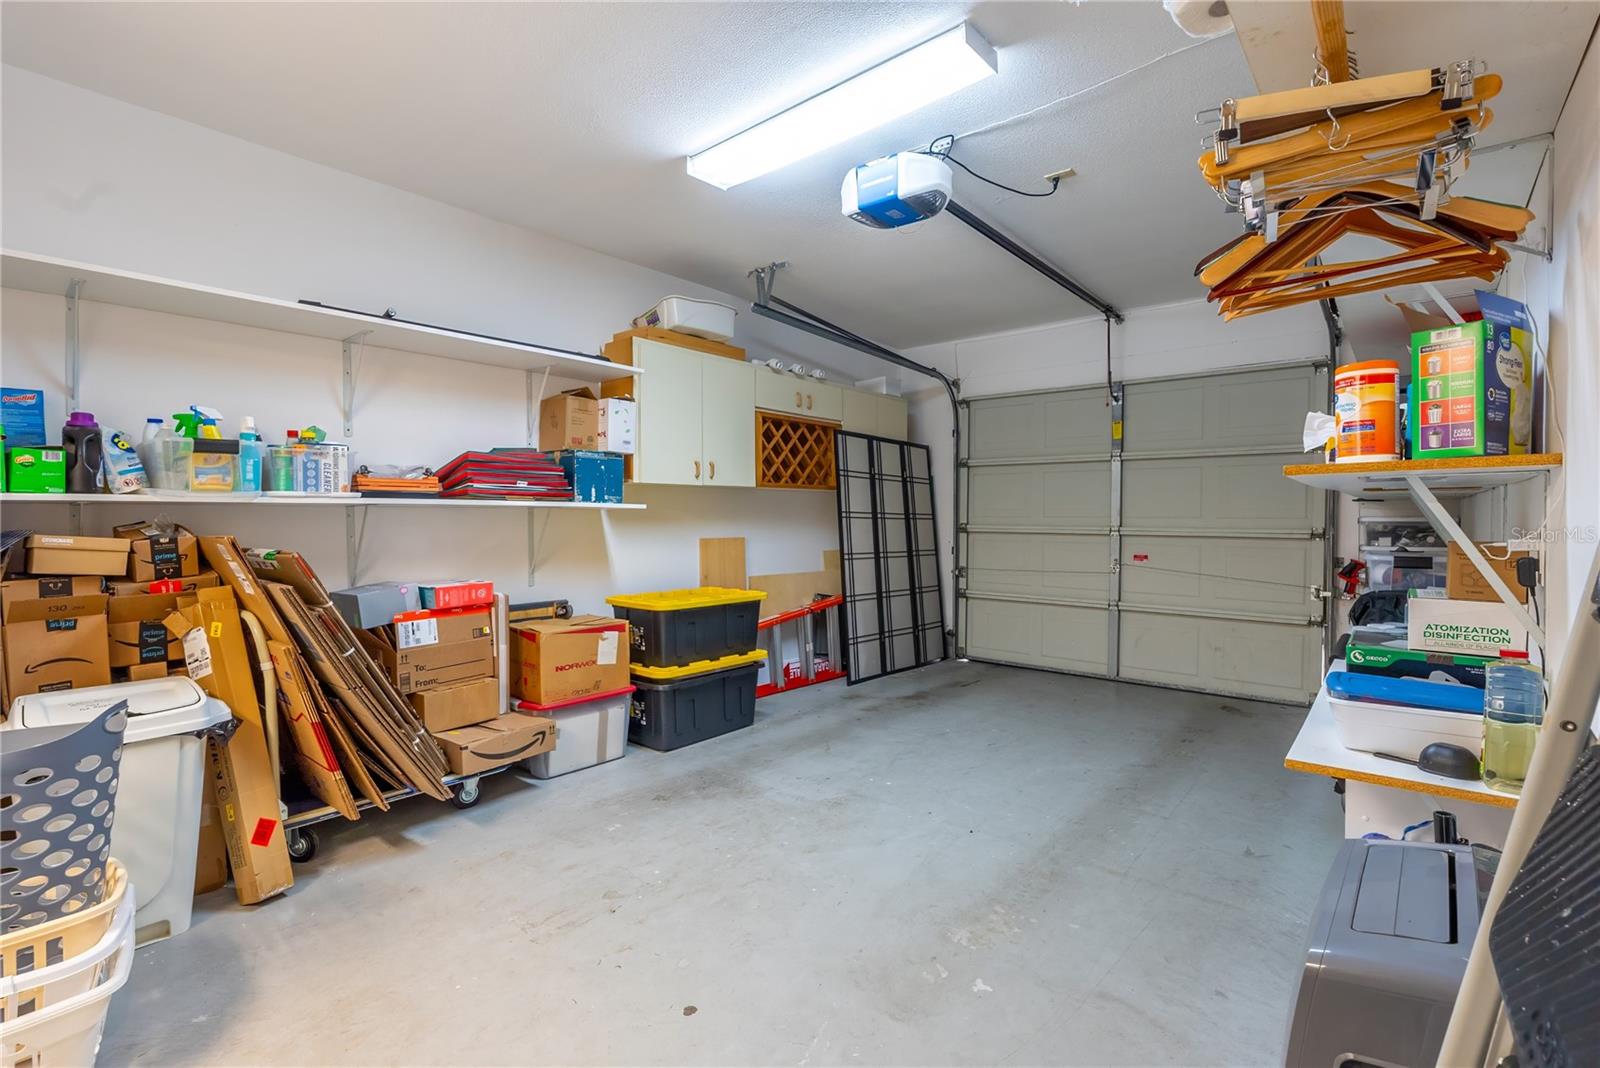 Shelving is on both sides of the garage.